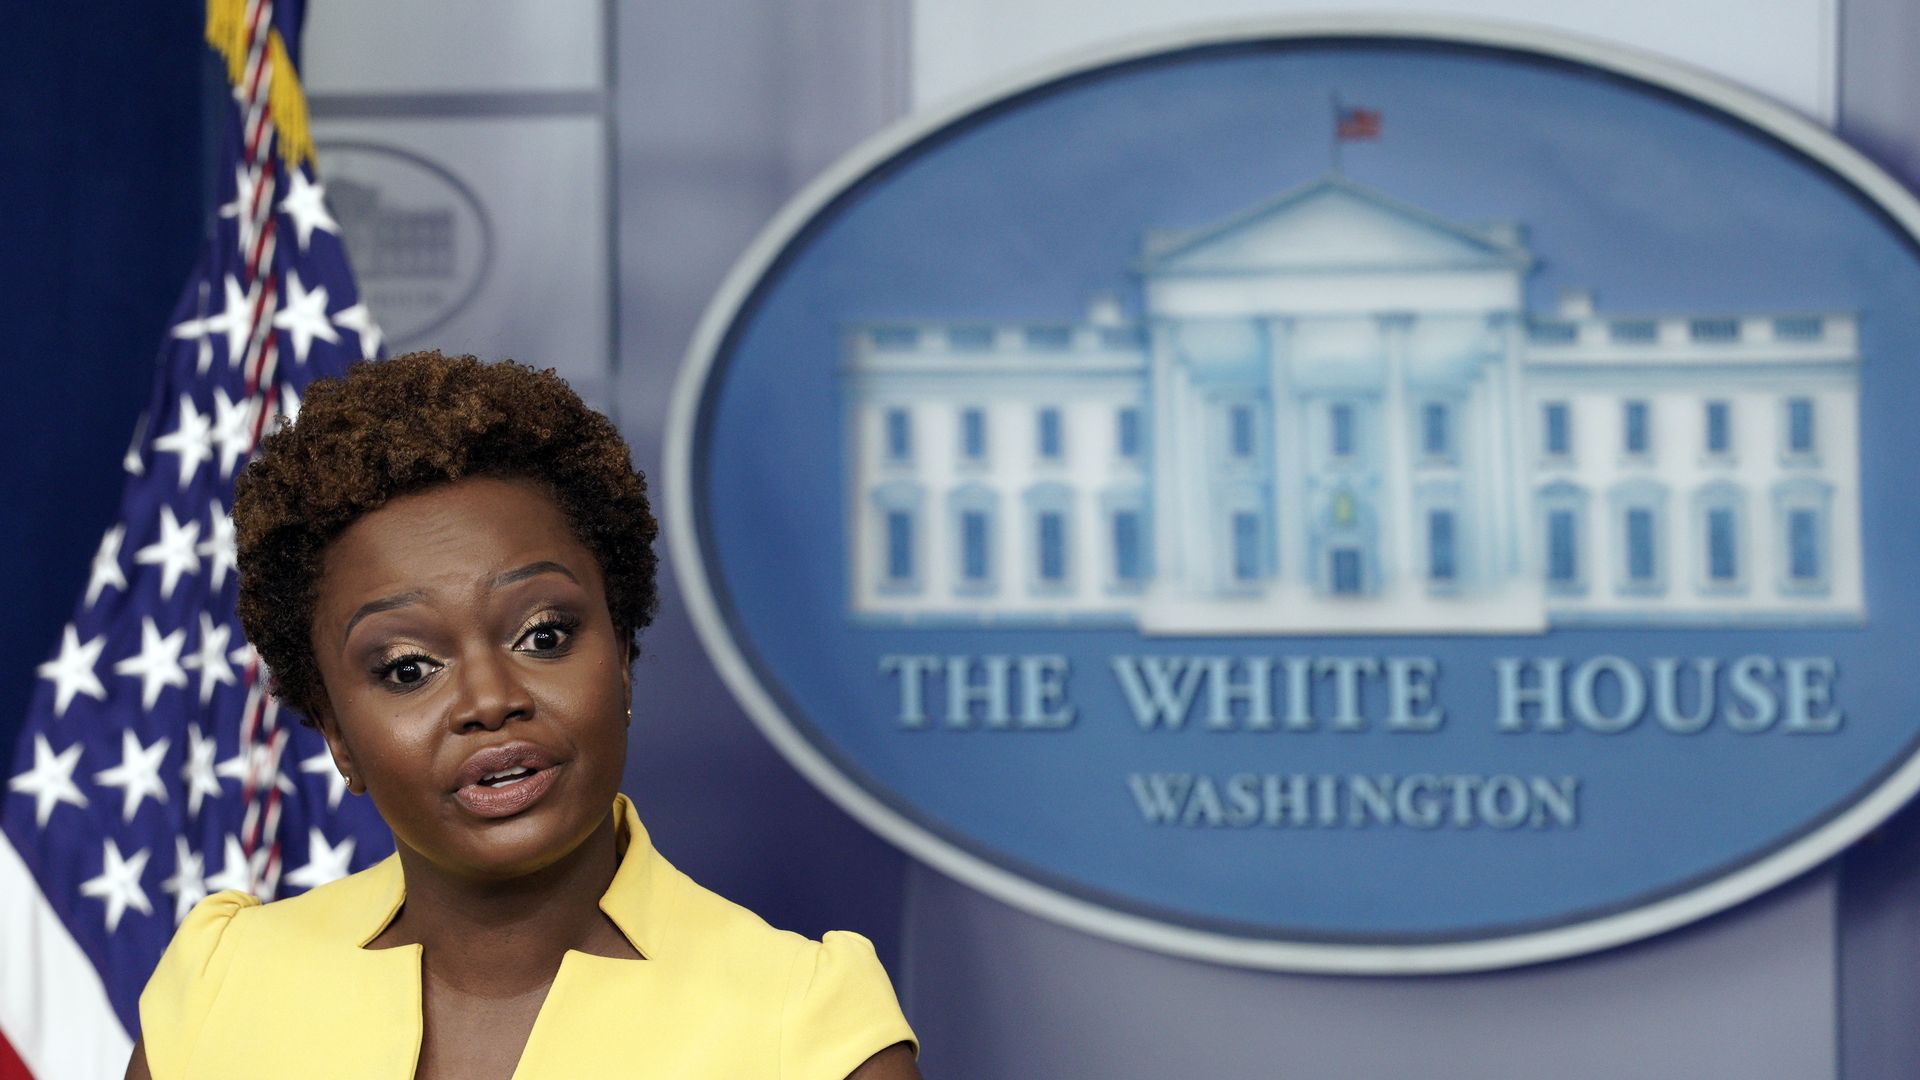 Deputy press secretary Karine Jean-Pierre is seen during her first briefing from the White House podium.